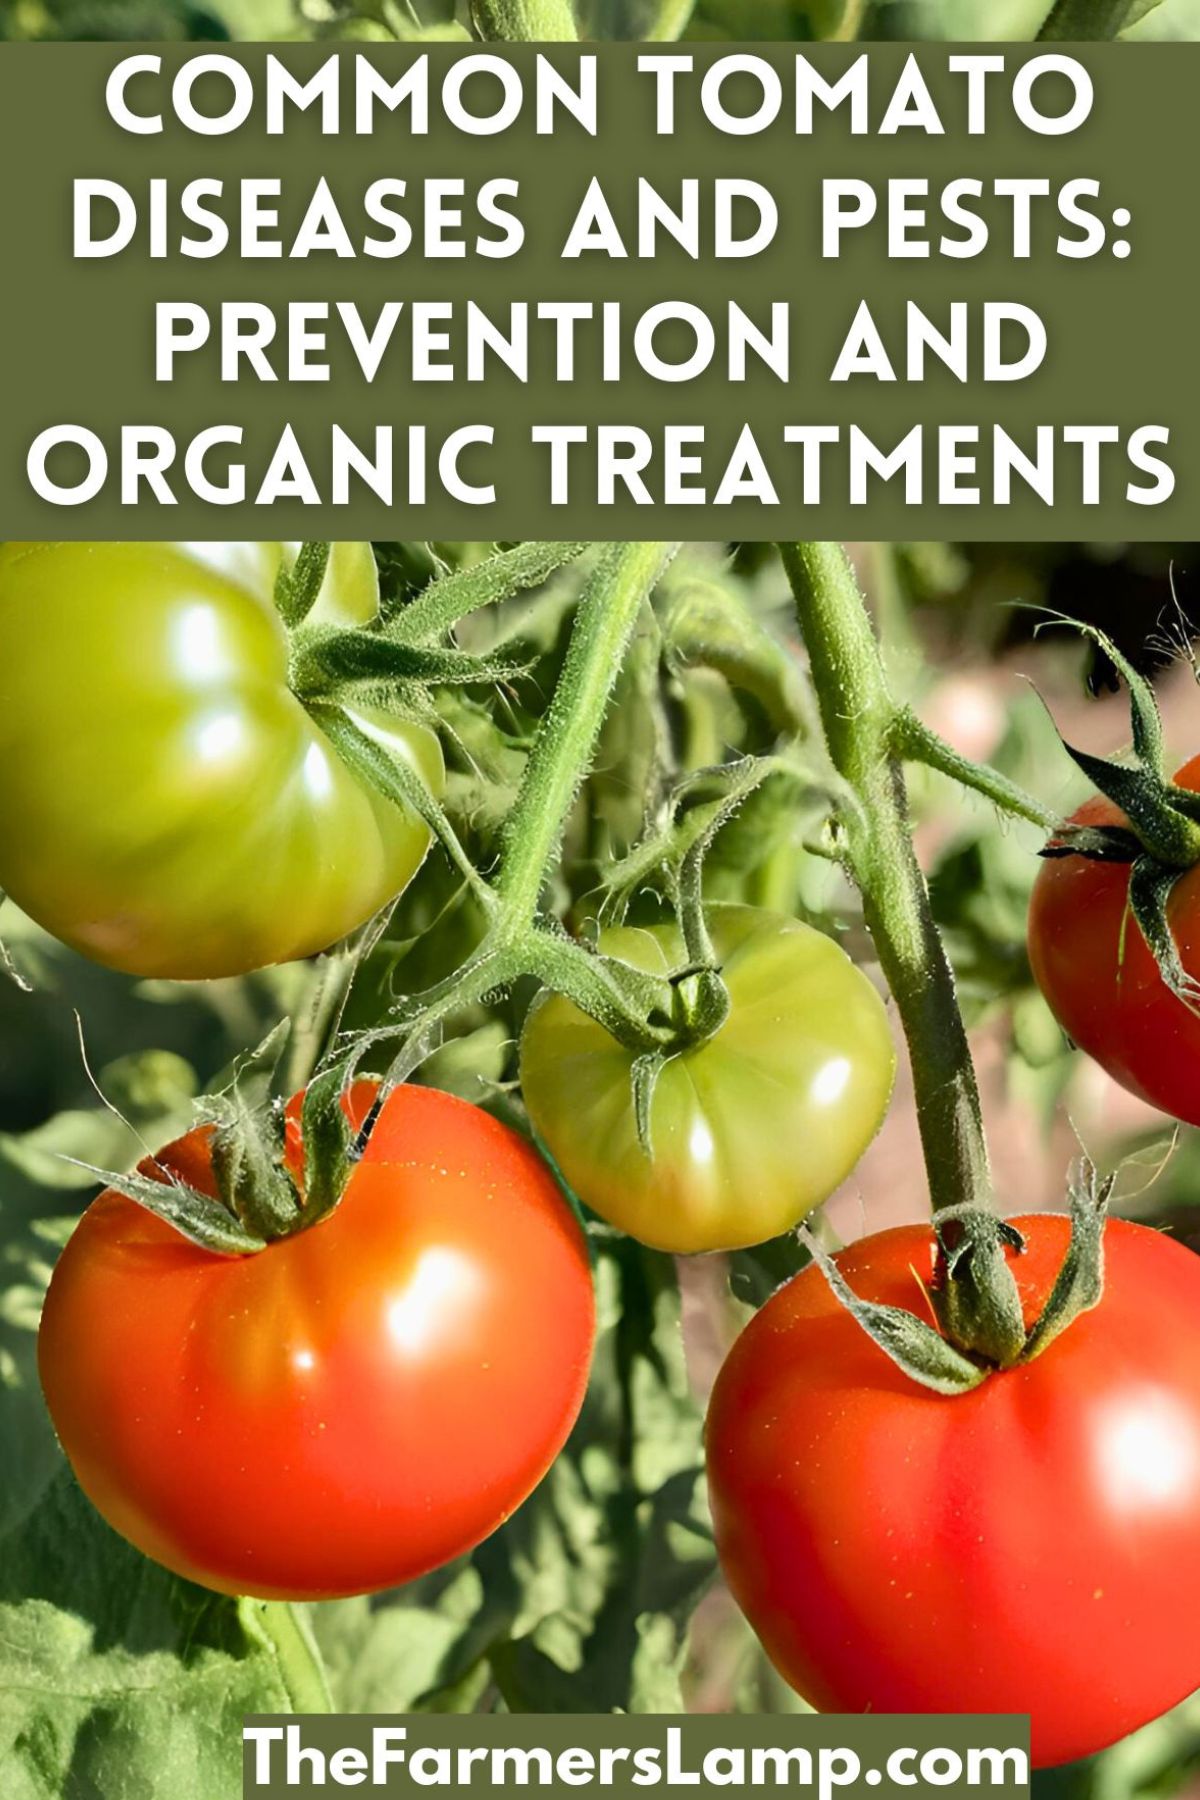 tomato plant with healthy tomatoes with words written that read common tomato diseases and pests prevention and organic treatments the farmers lamp dot com